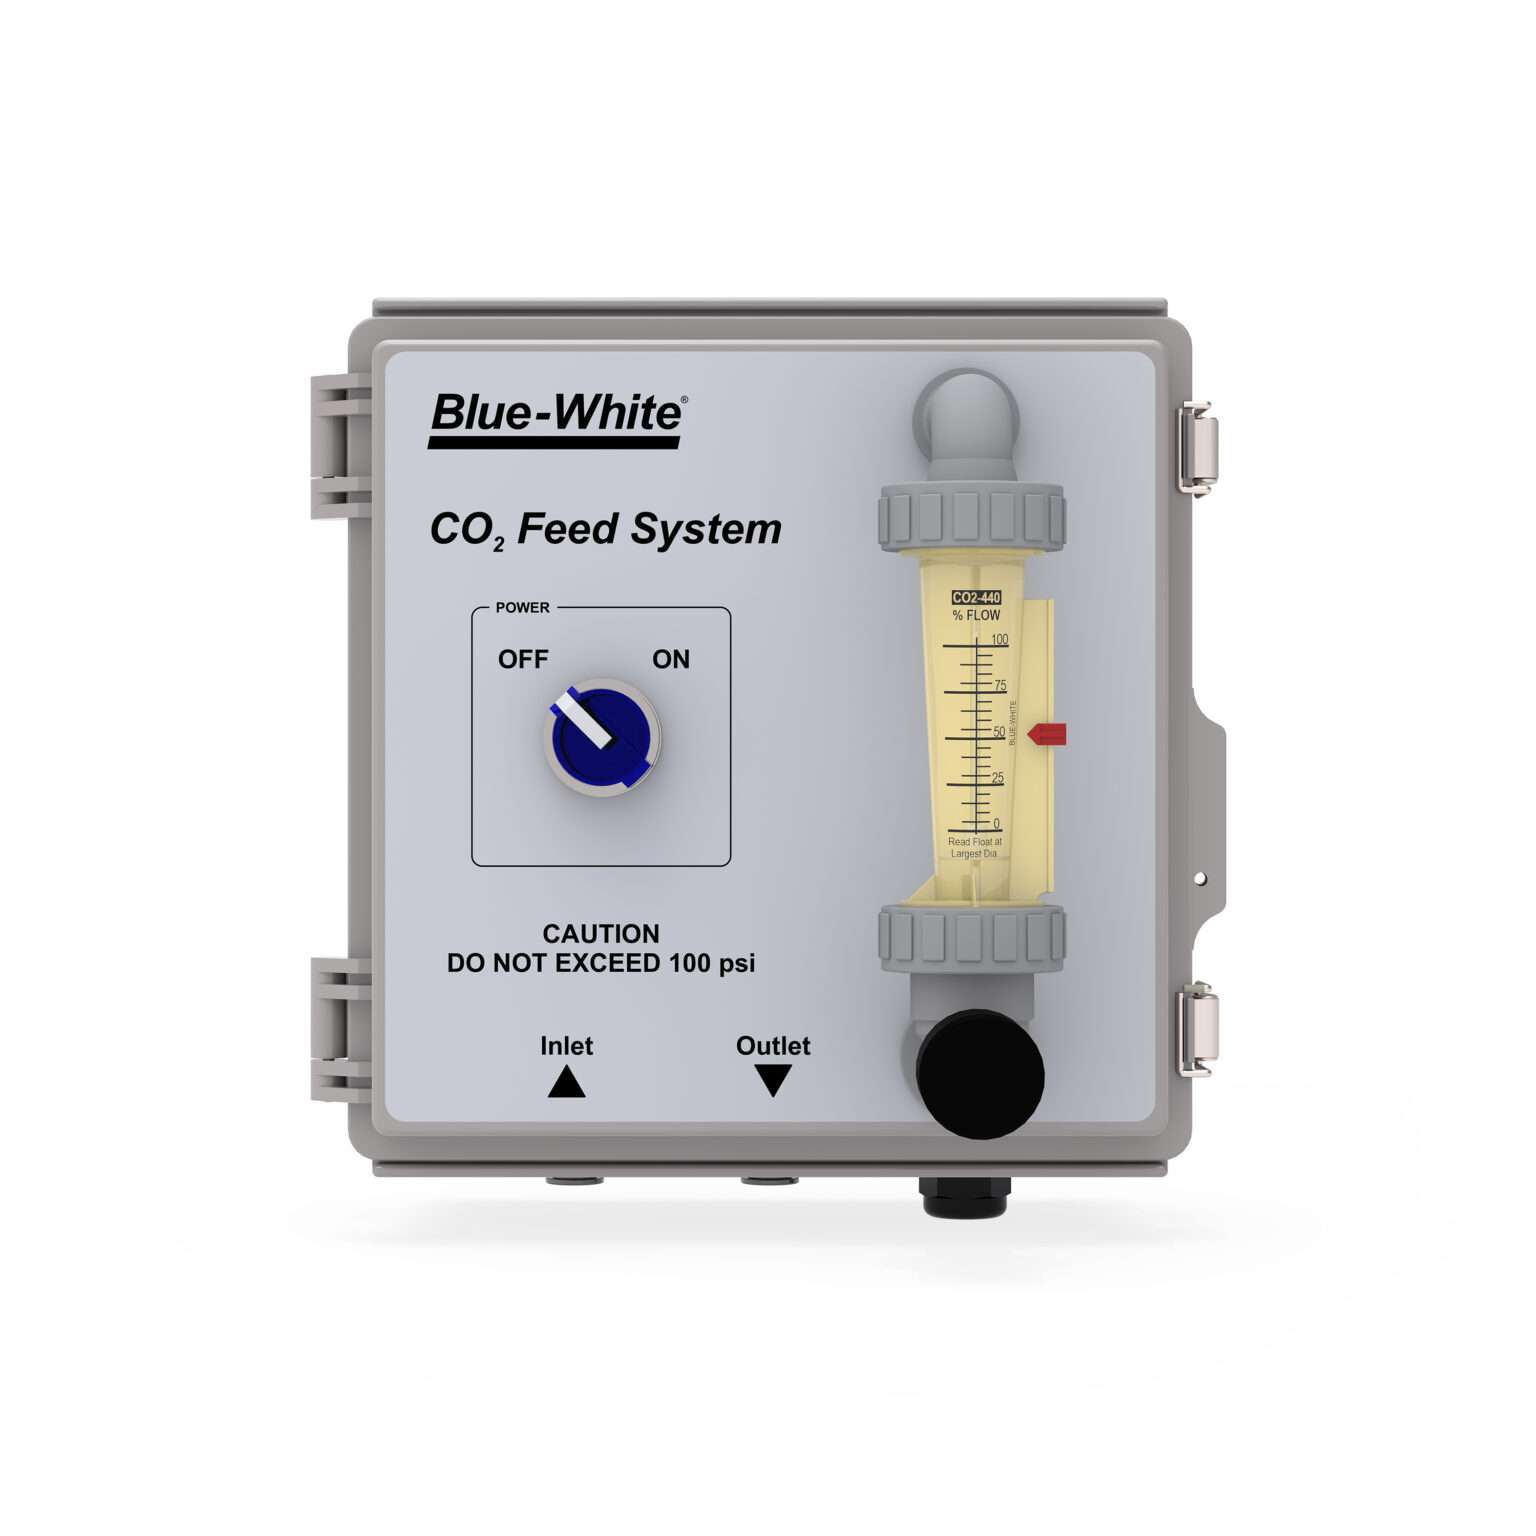 co2 feed system front